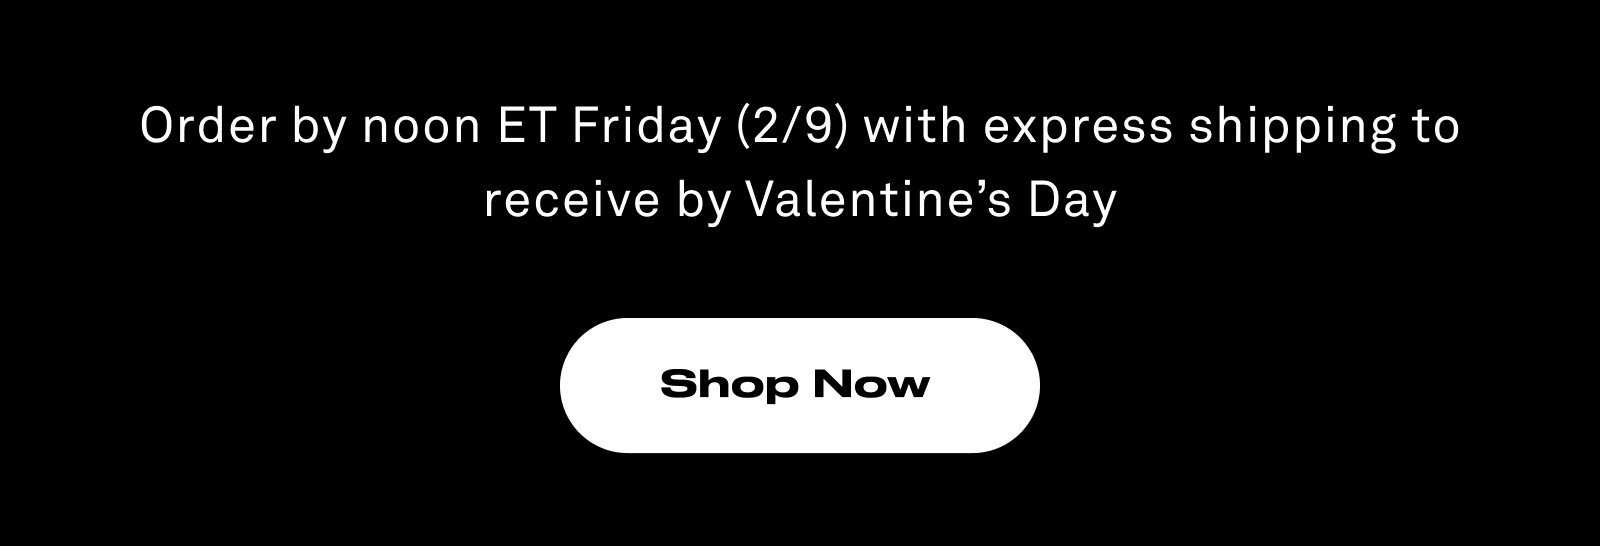 Order by noon Friday with express shipping to receive by Valentine's Day